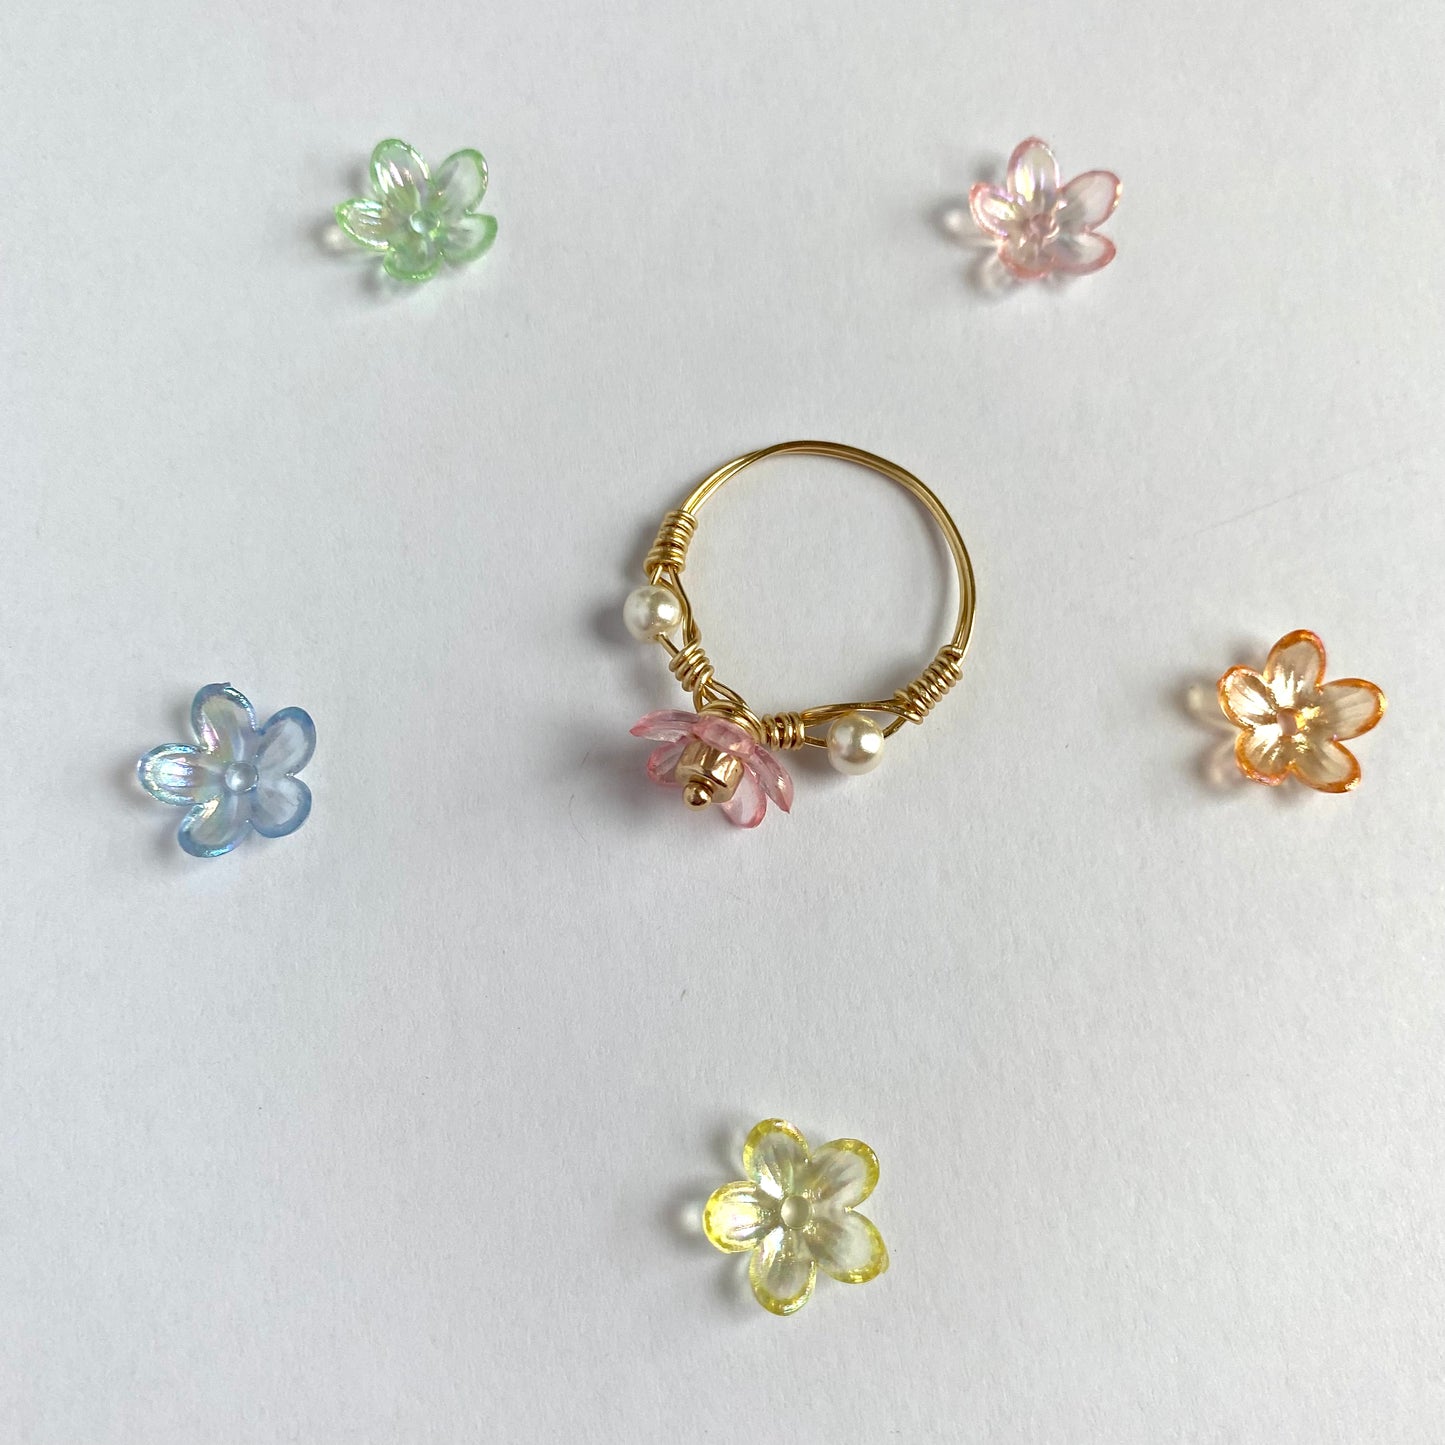 Flower Rings with Pearl Bead Accents